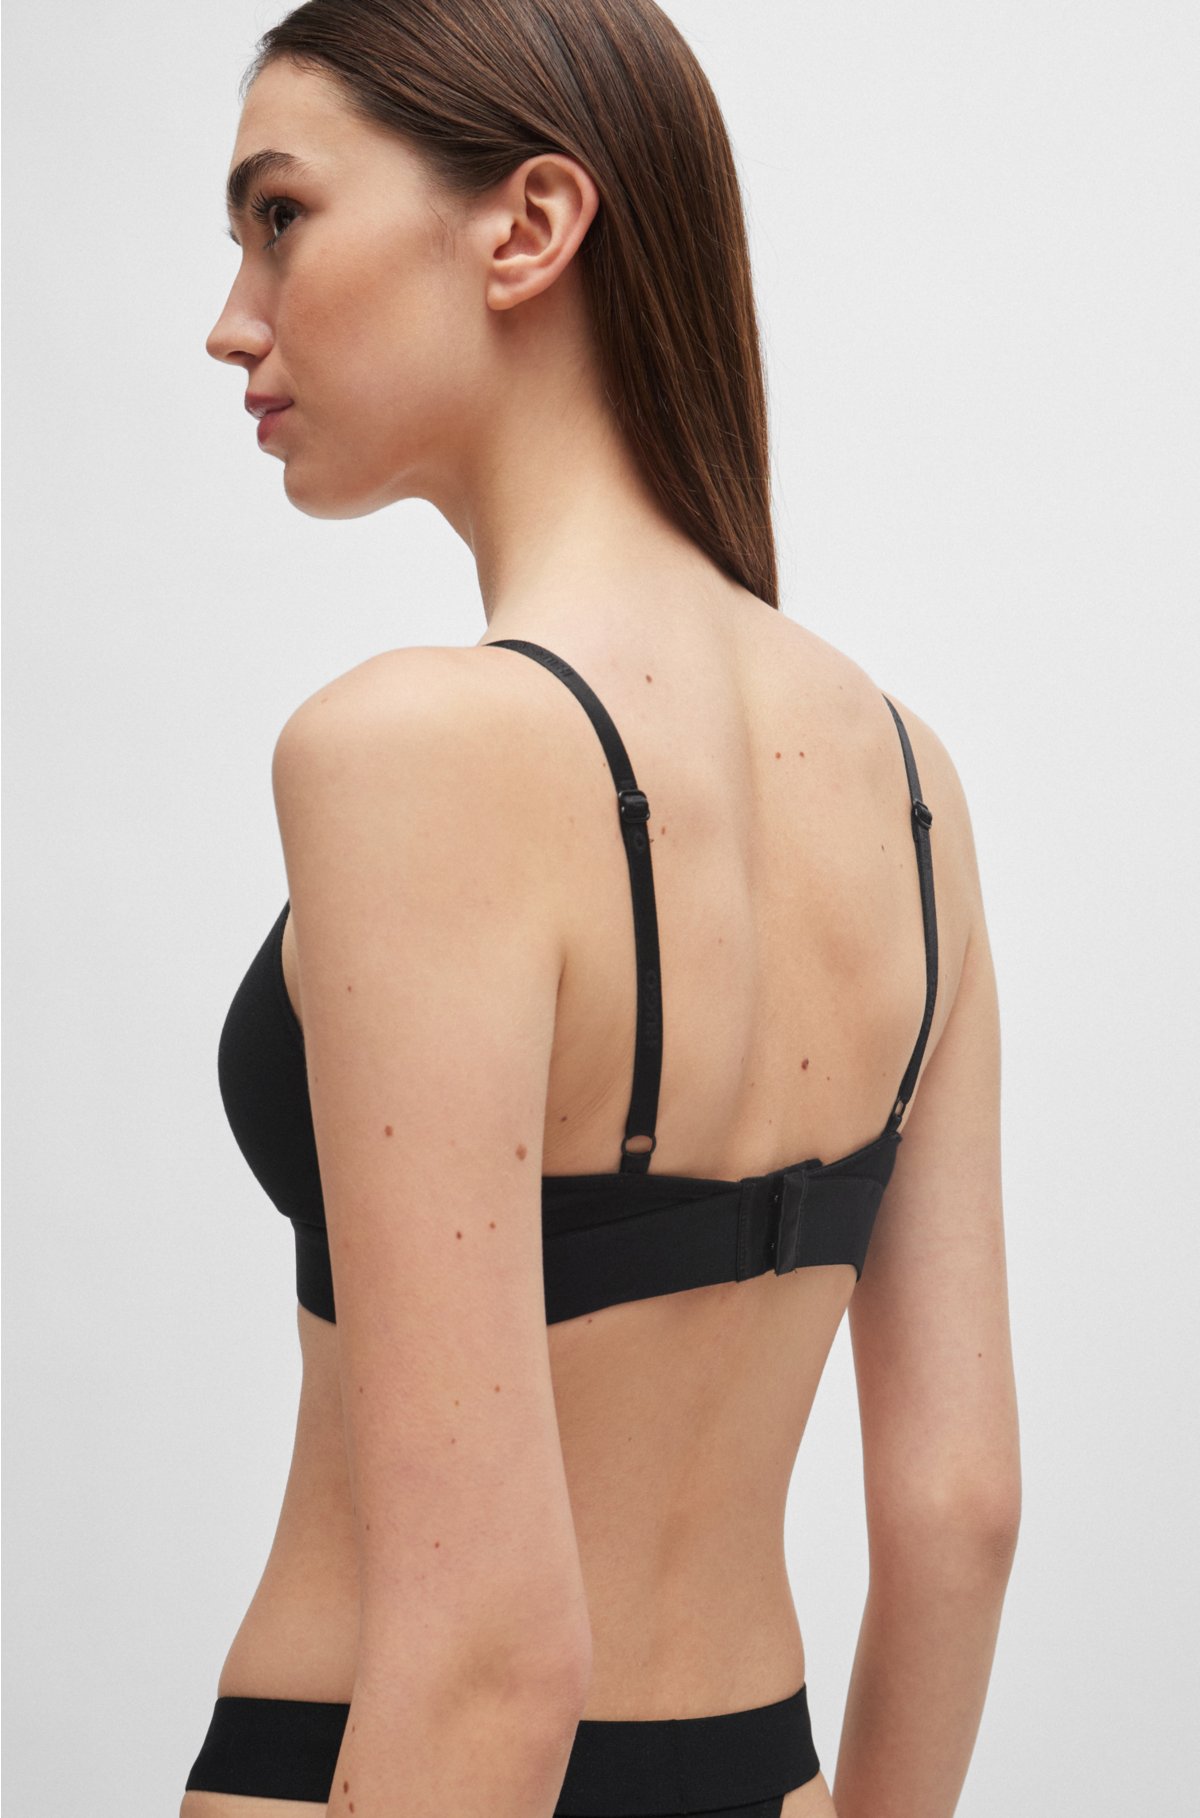 HUGO - Mixed-material underwired bra with foil logo